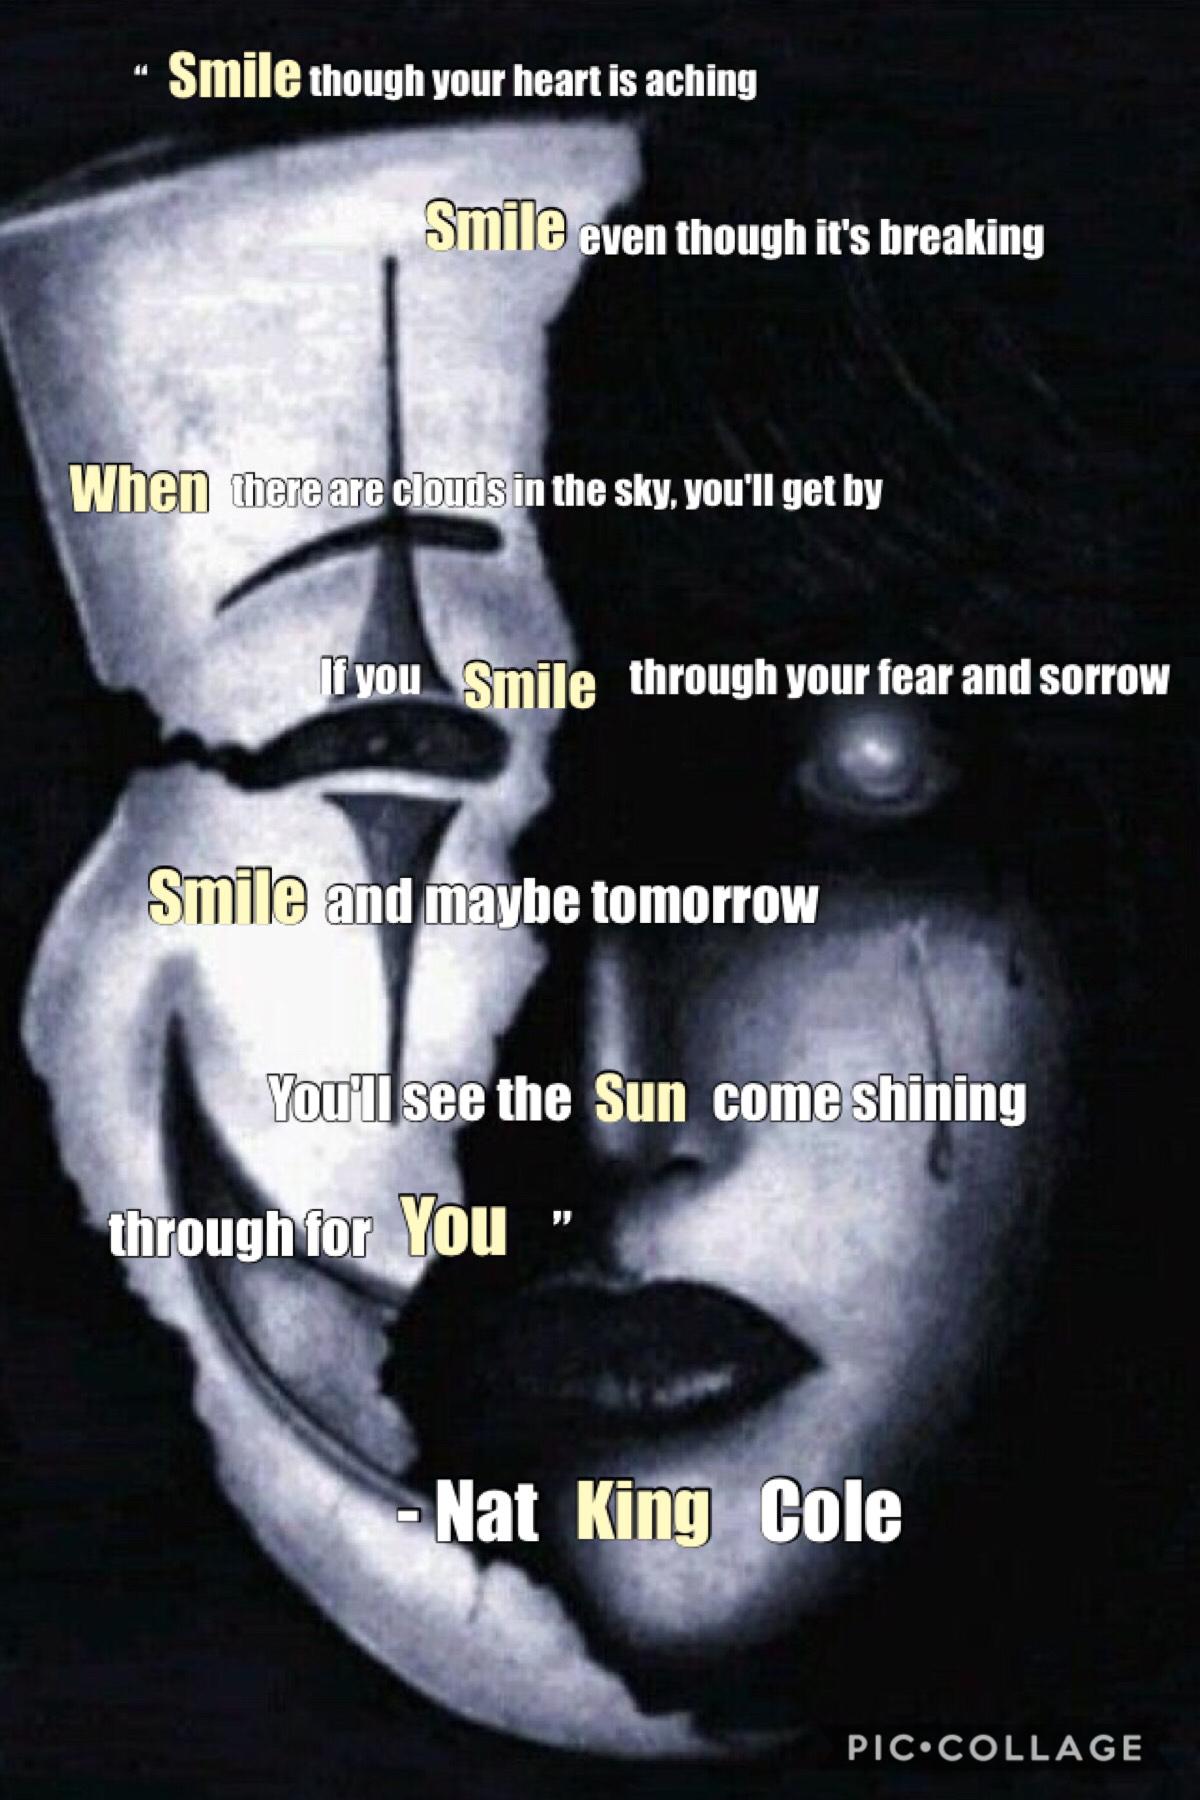 This is from the song Smile by Nat King Cole. The picture in the back is supposed to represent someone putting a smile on their face even though their heart in breaking. 